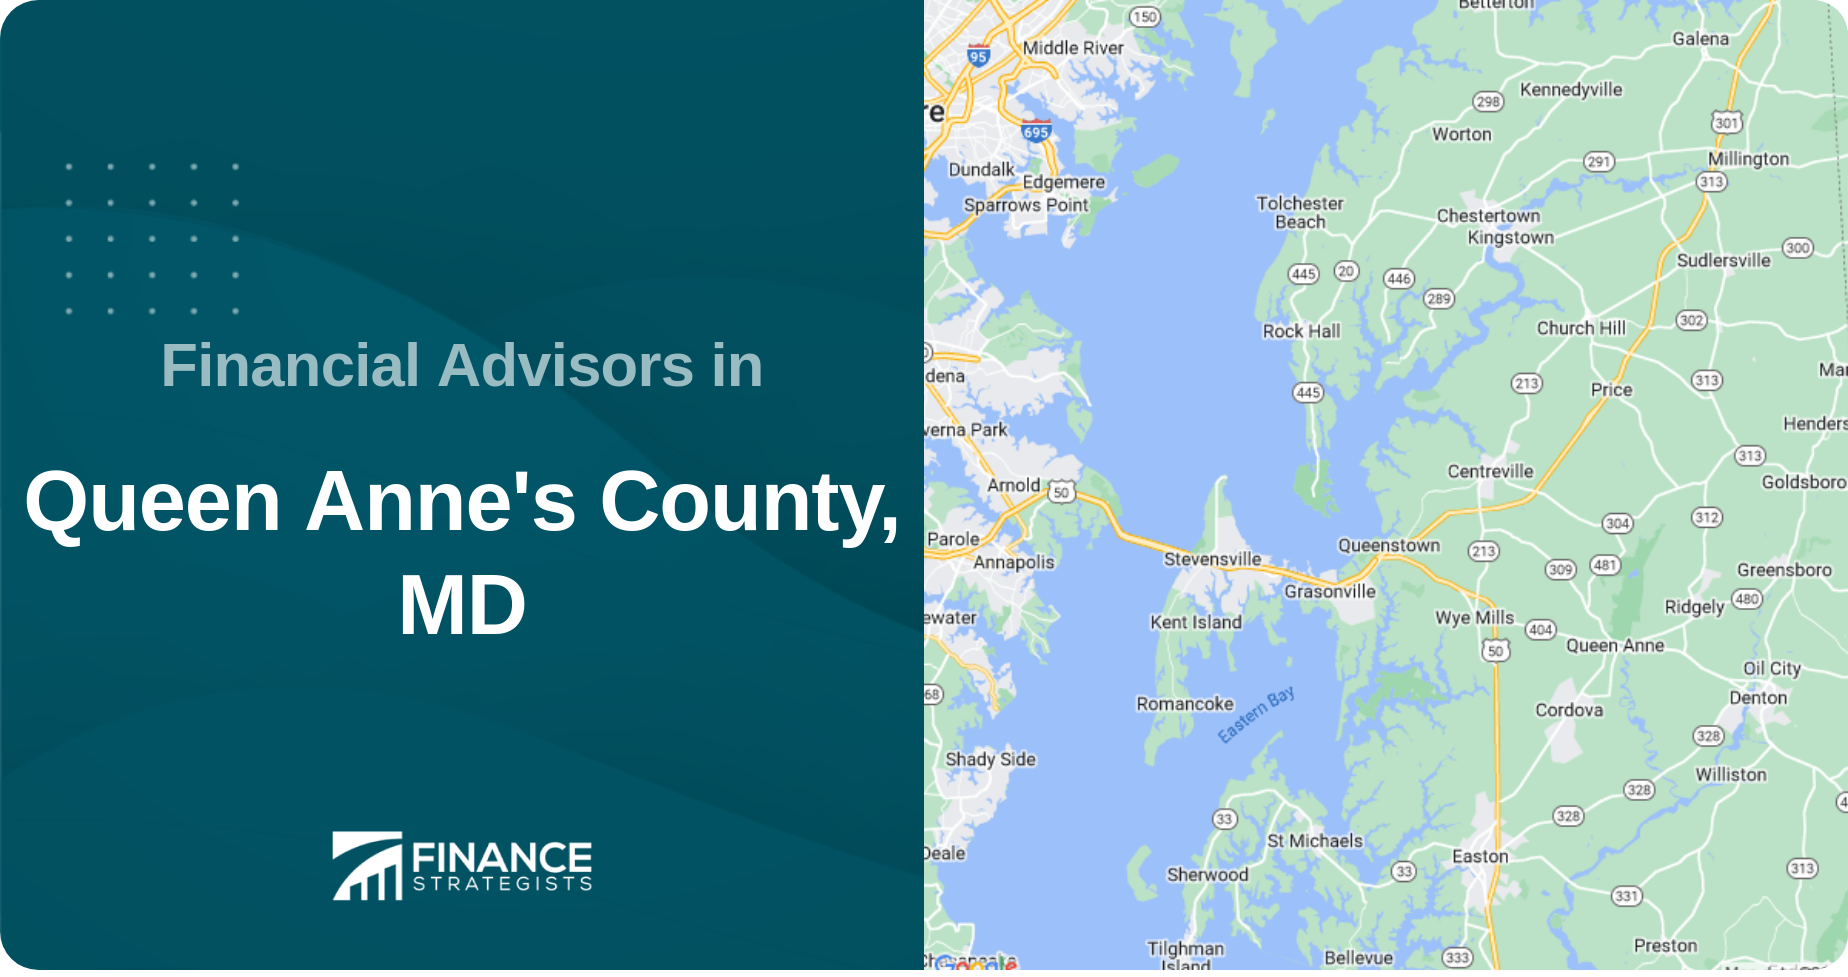 Financial Advisors in Queen Anne's County, MD